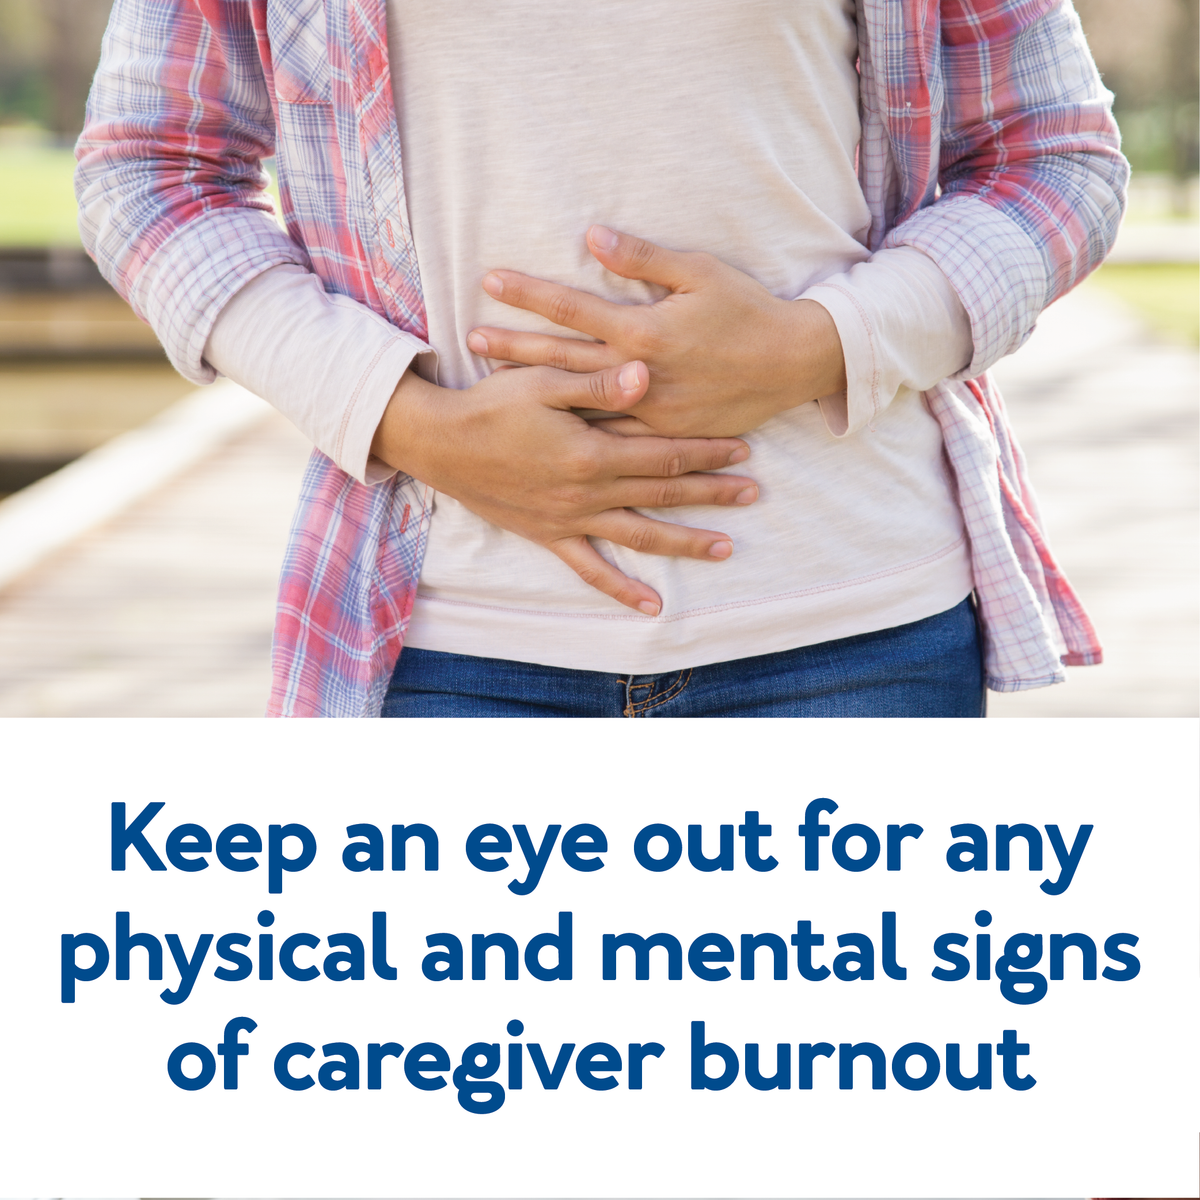 A person holding their stomach. Text, “Keep an eye out for any physical and mental signs of caregiver burnout”